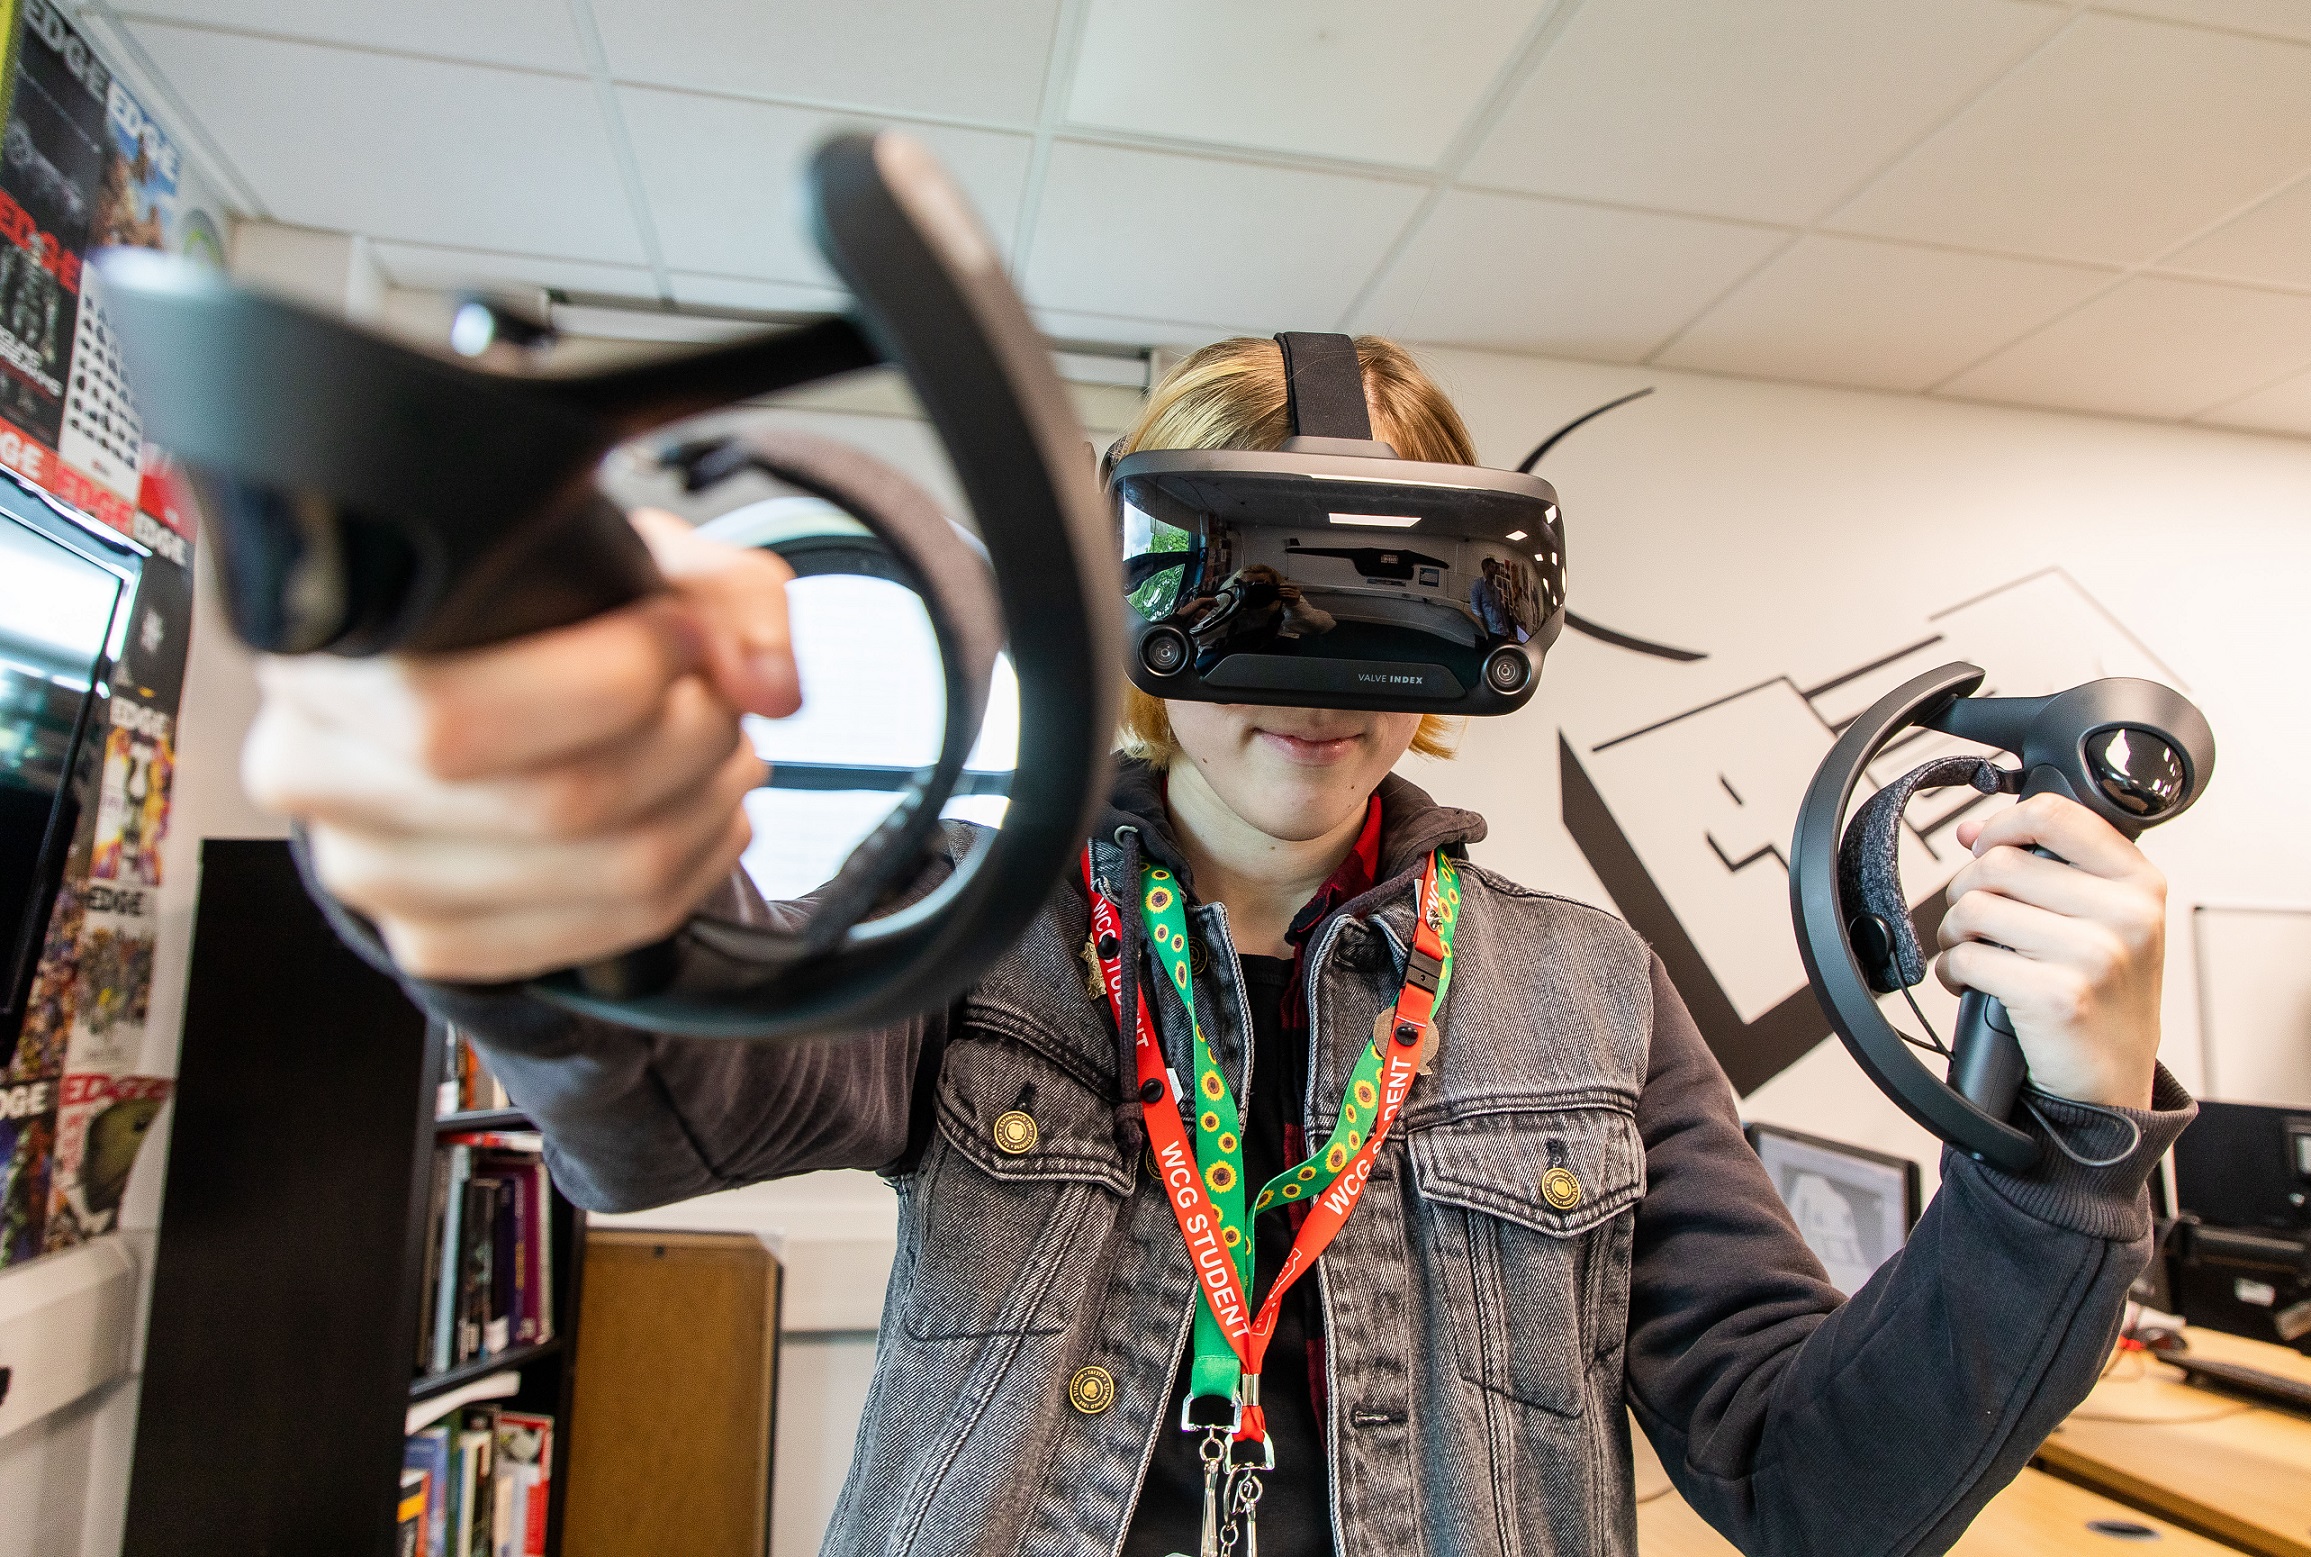 VR headsets to provide immersive careers experience as part of National Apprenticeship Week 